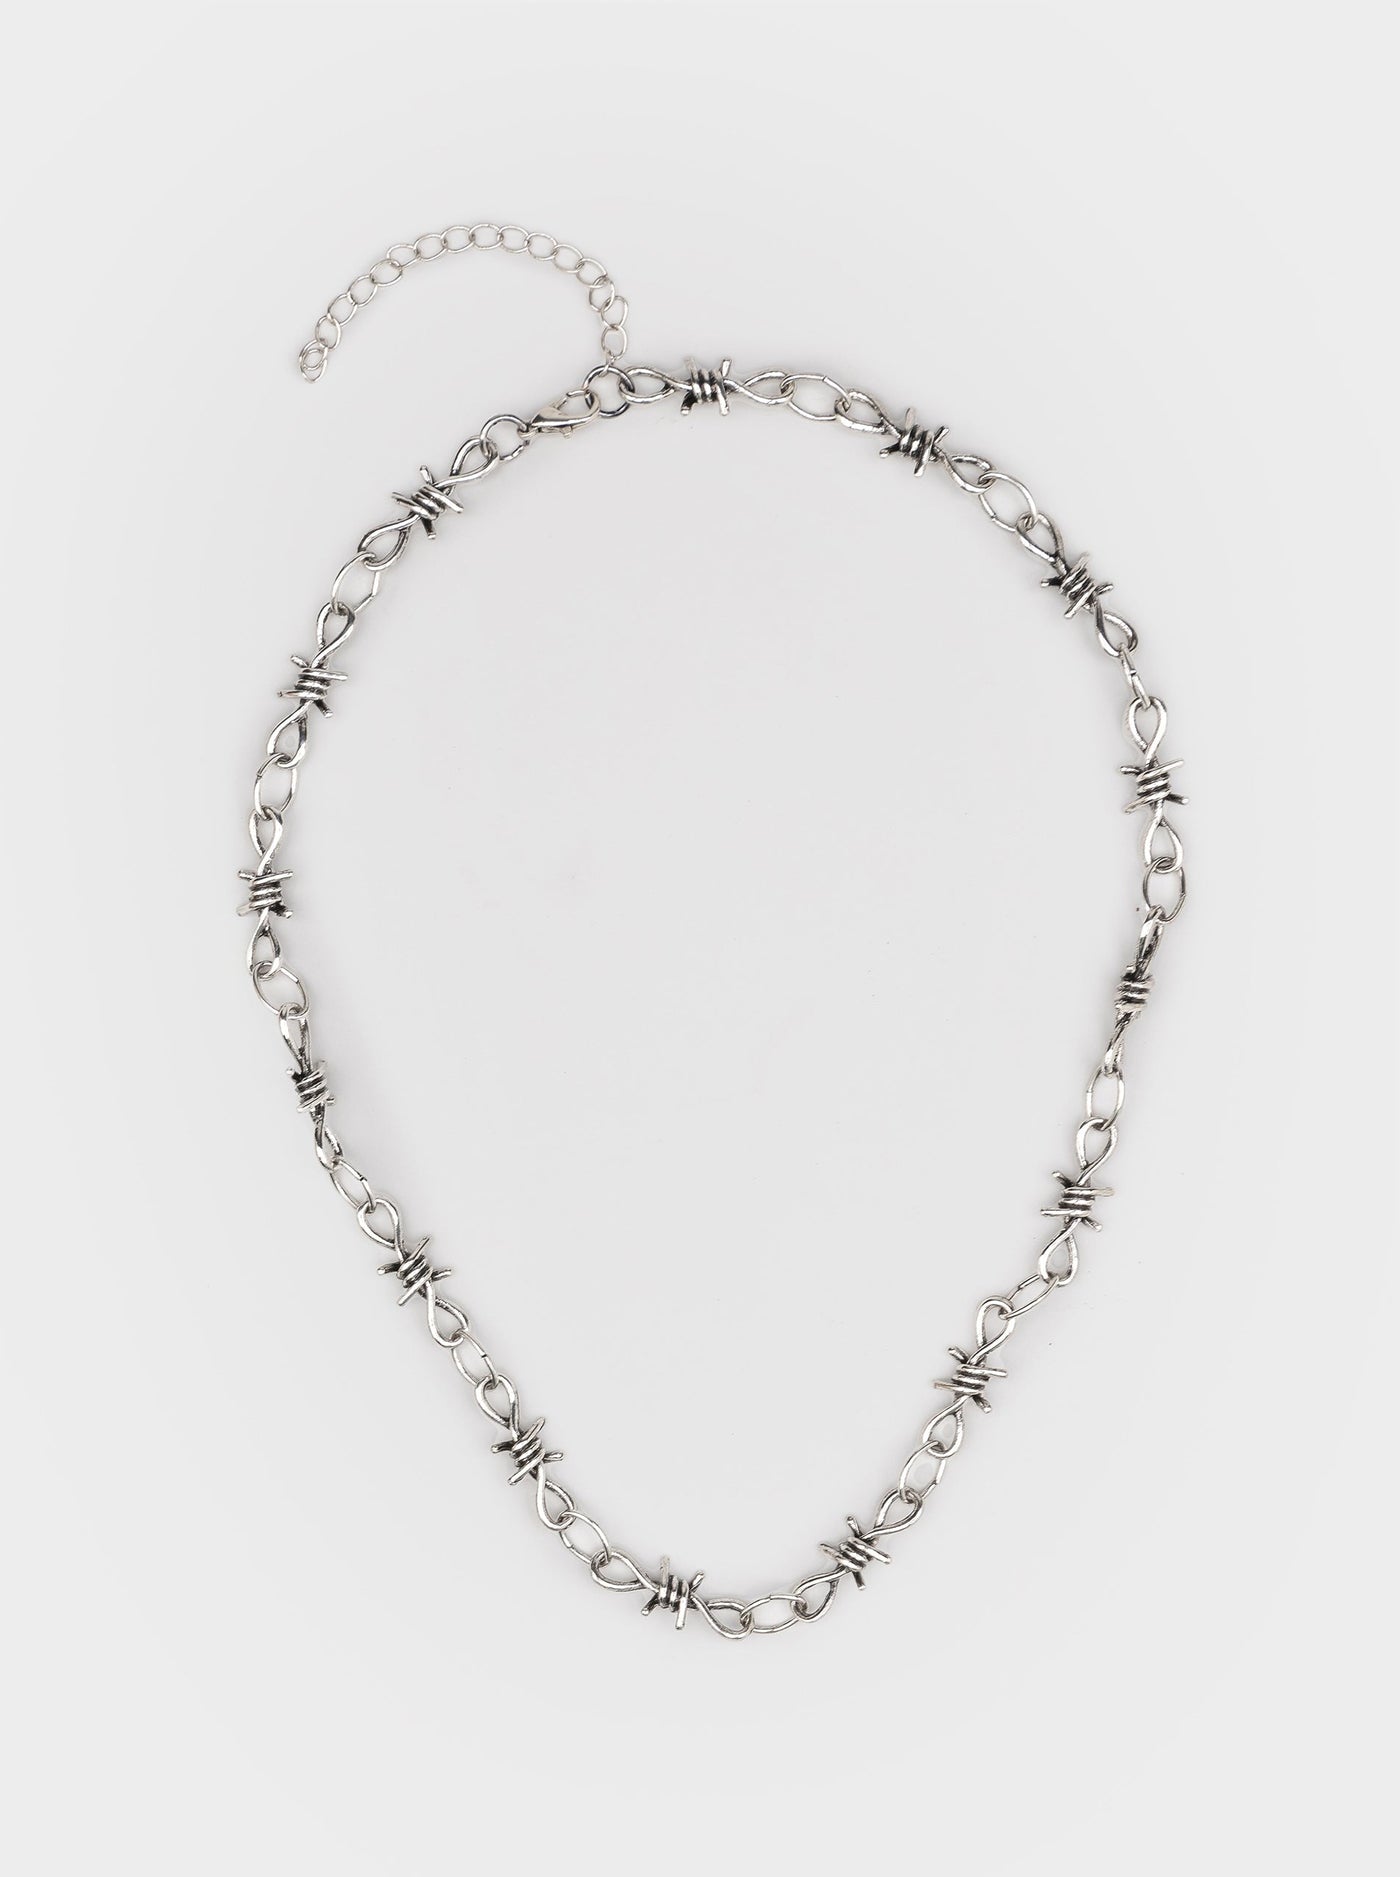 Silver necklace with thorns chain